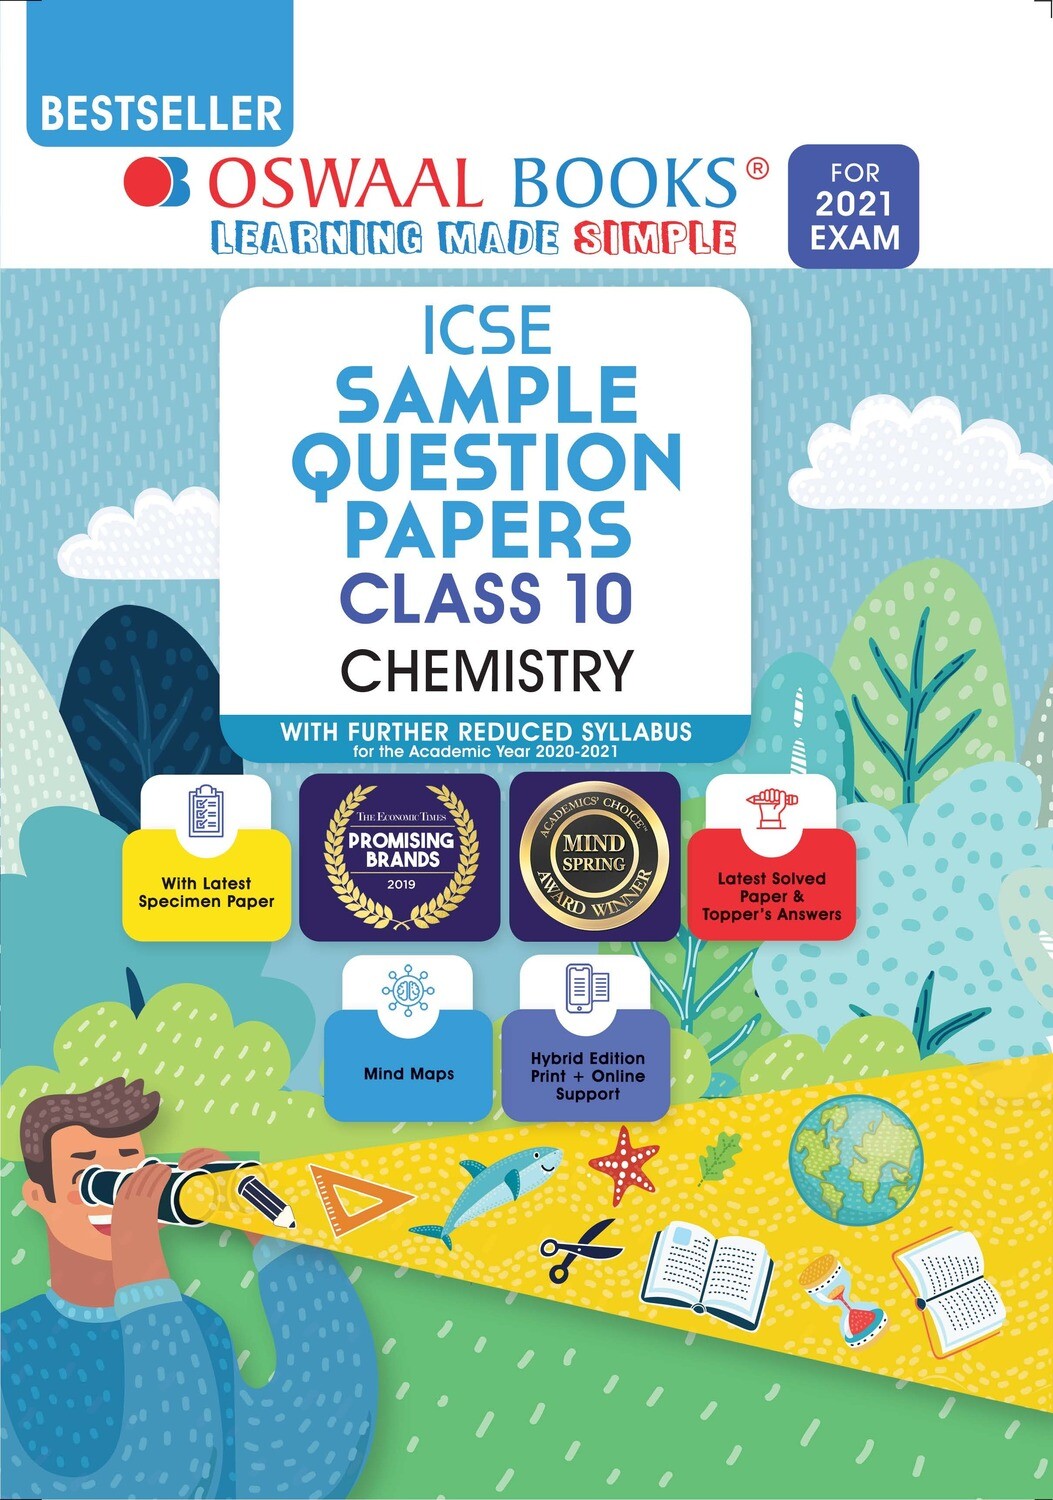 Buy e-book: Oswaal ICSE Sample Question Papers Class 10 Chemistry (Reduced Syllabus for 2021 Exam)